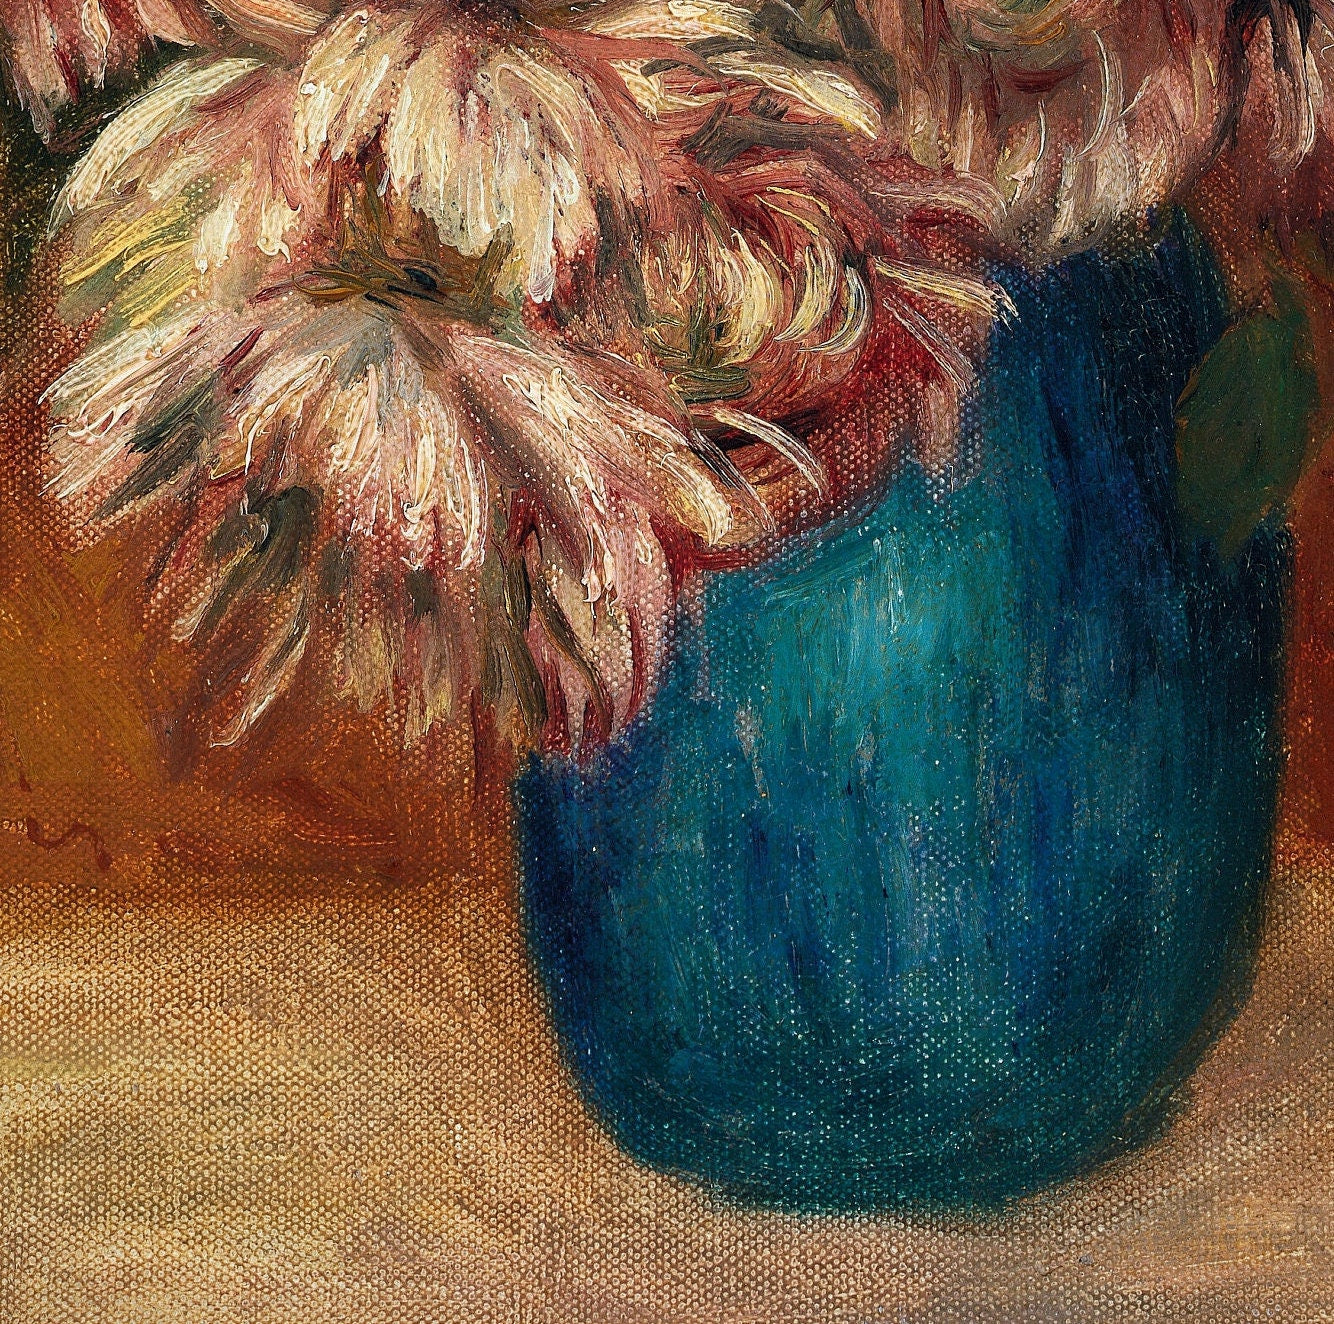 Flowers in a Green Vase by Pierre Auguste Renoir,3d Printed with texture and brush strokes looks like original oil-painting,code:711